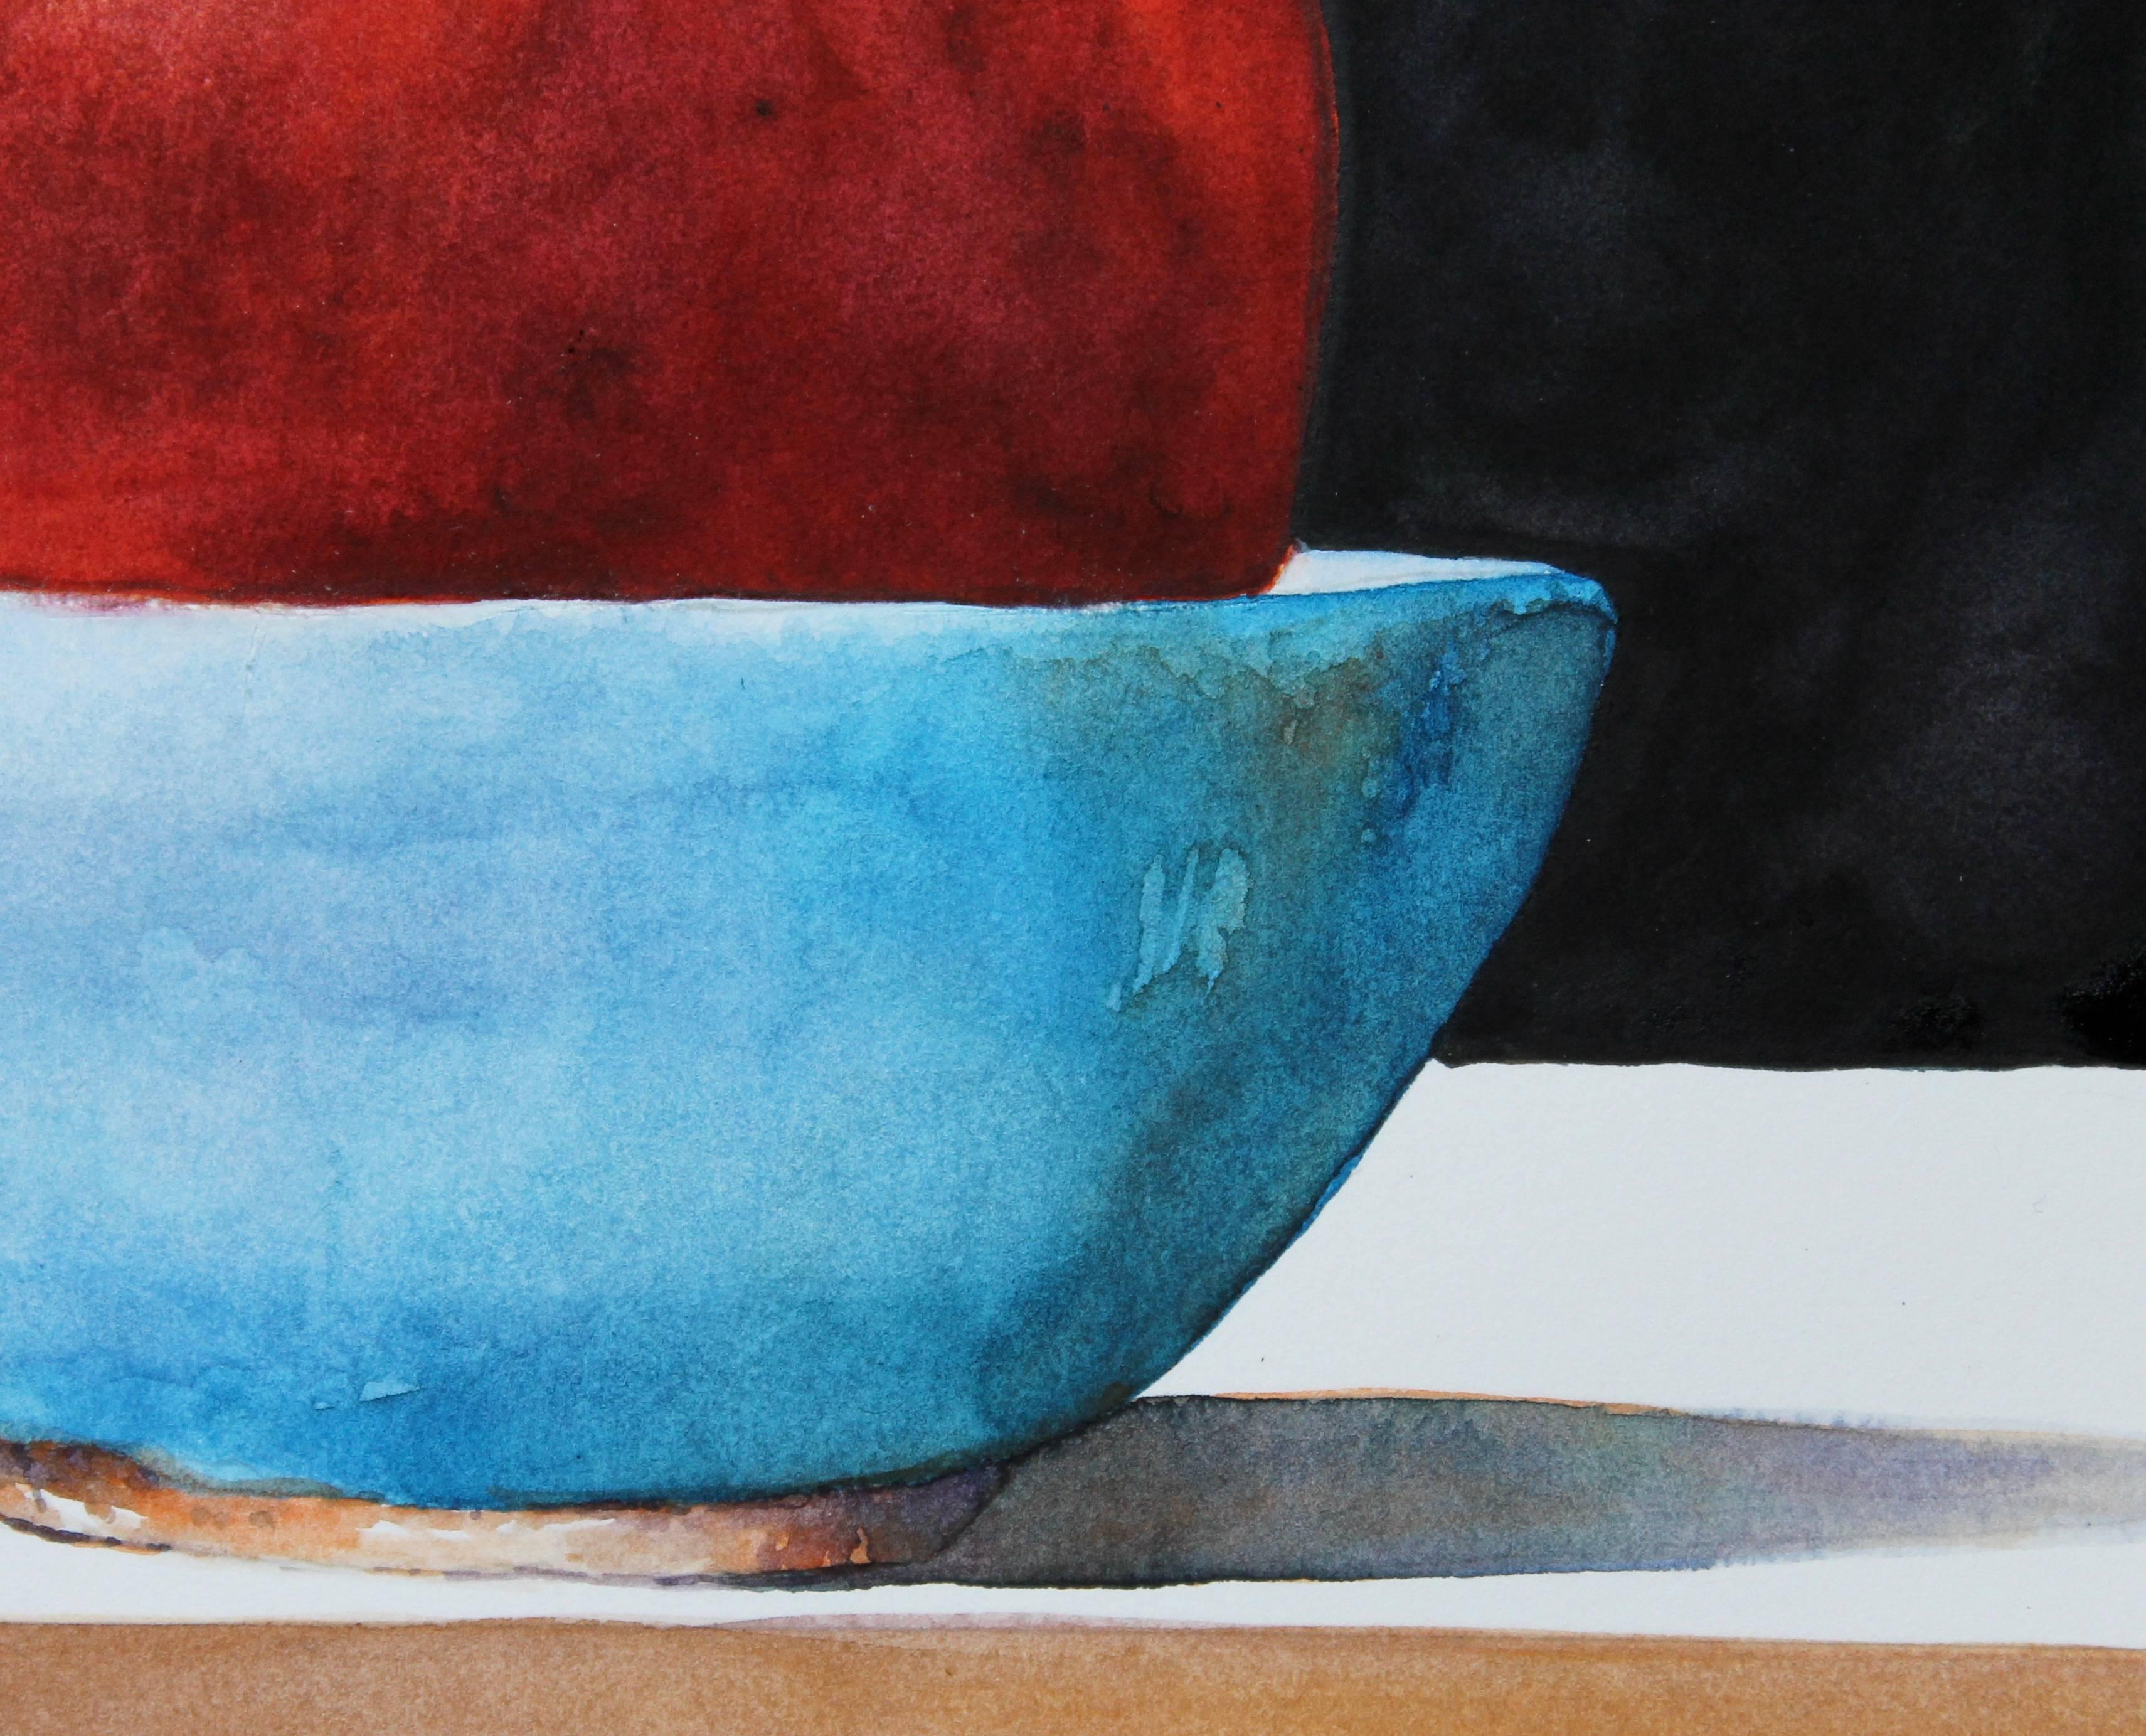 Red Apple with Blue Bowl - Black Still-Life by Dwight Smith